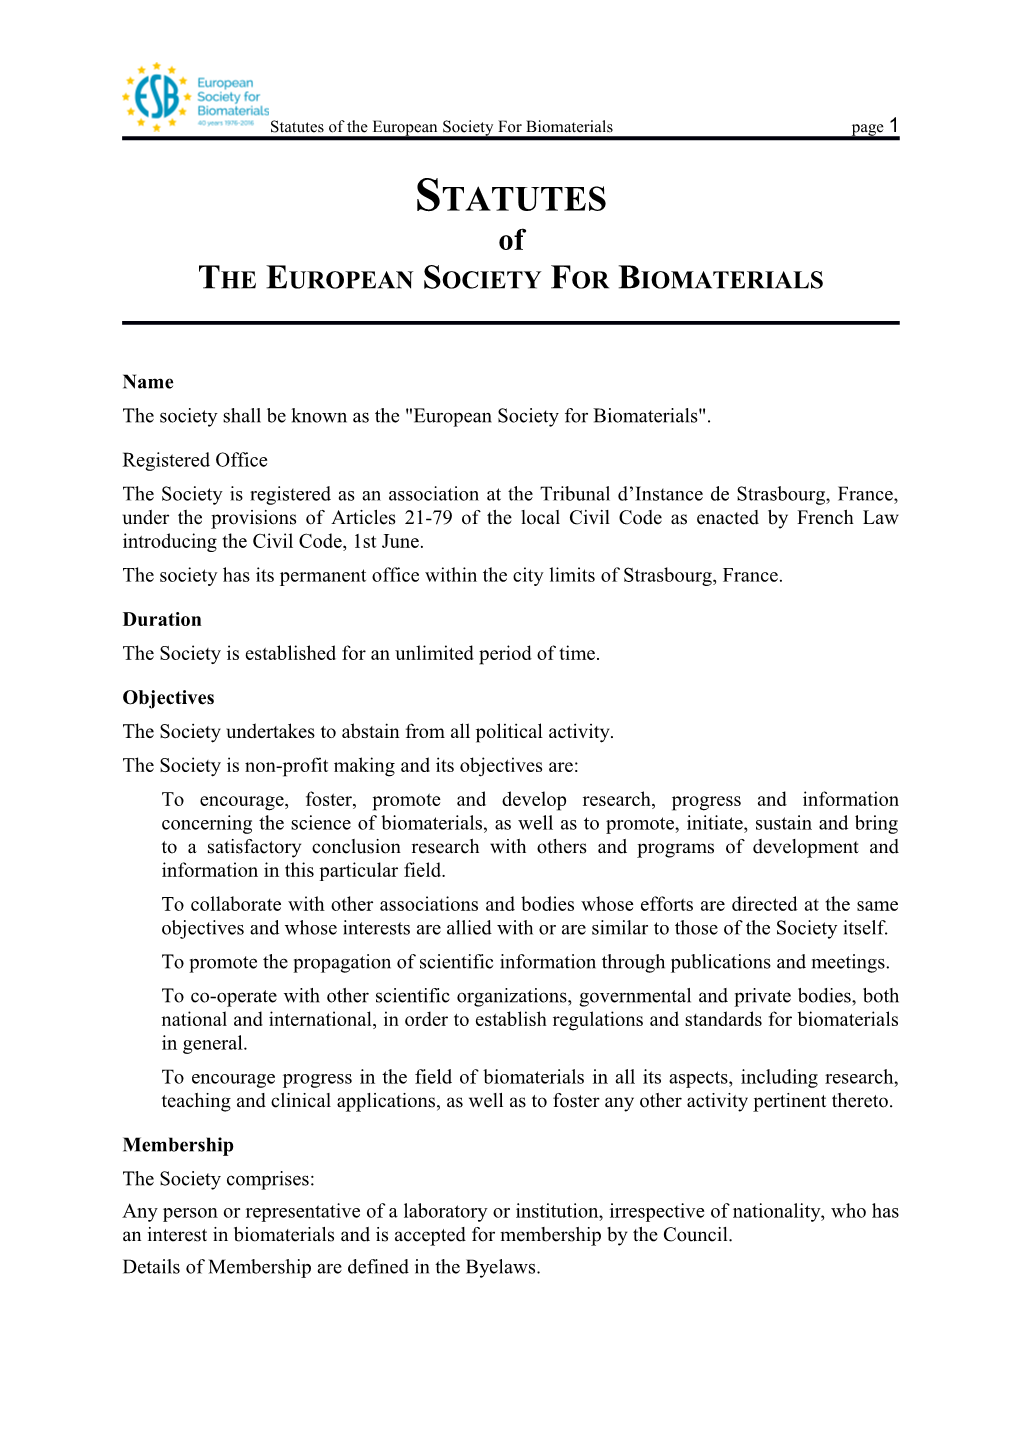 The European Society for Biomaterials